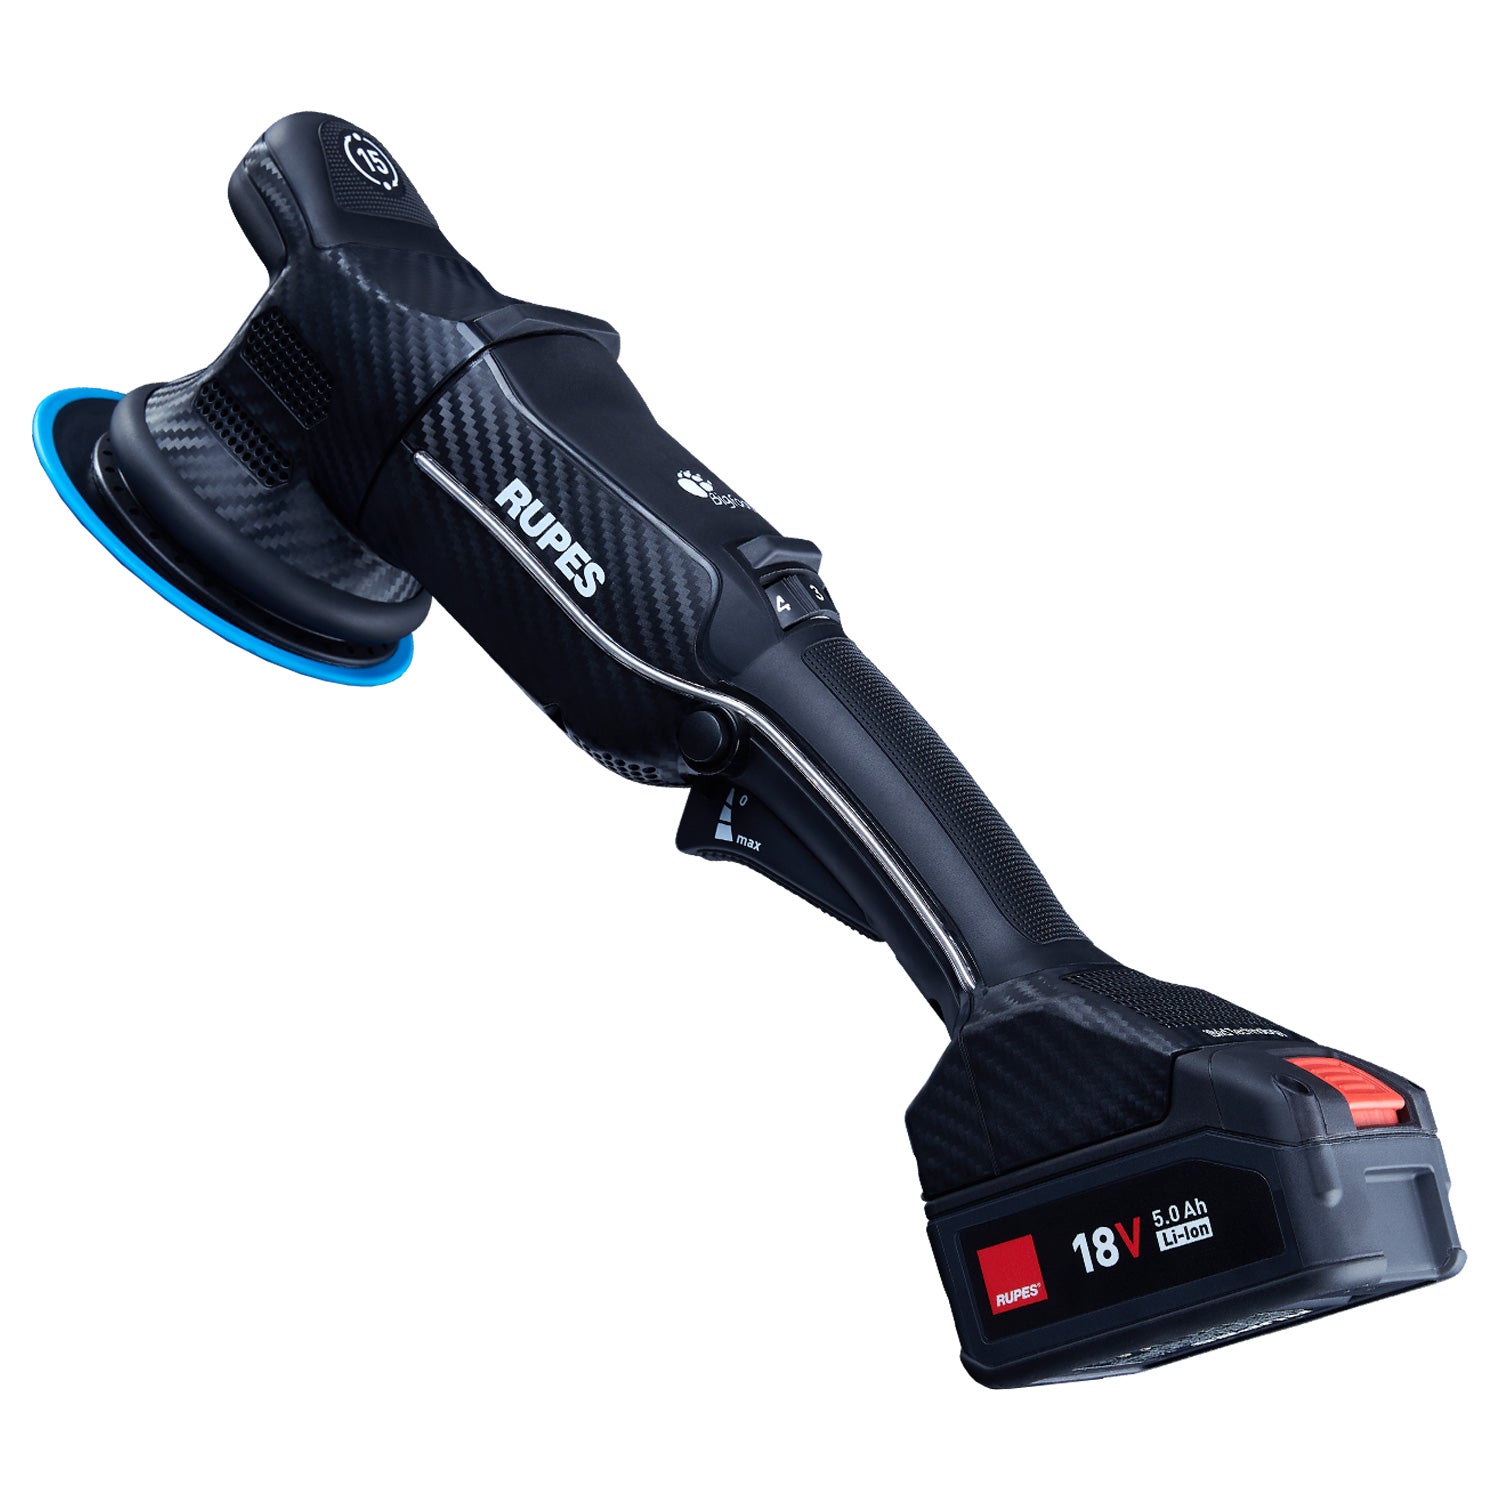 rupes-5-inch-cordless